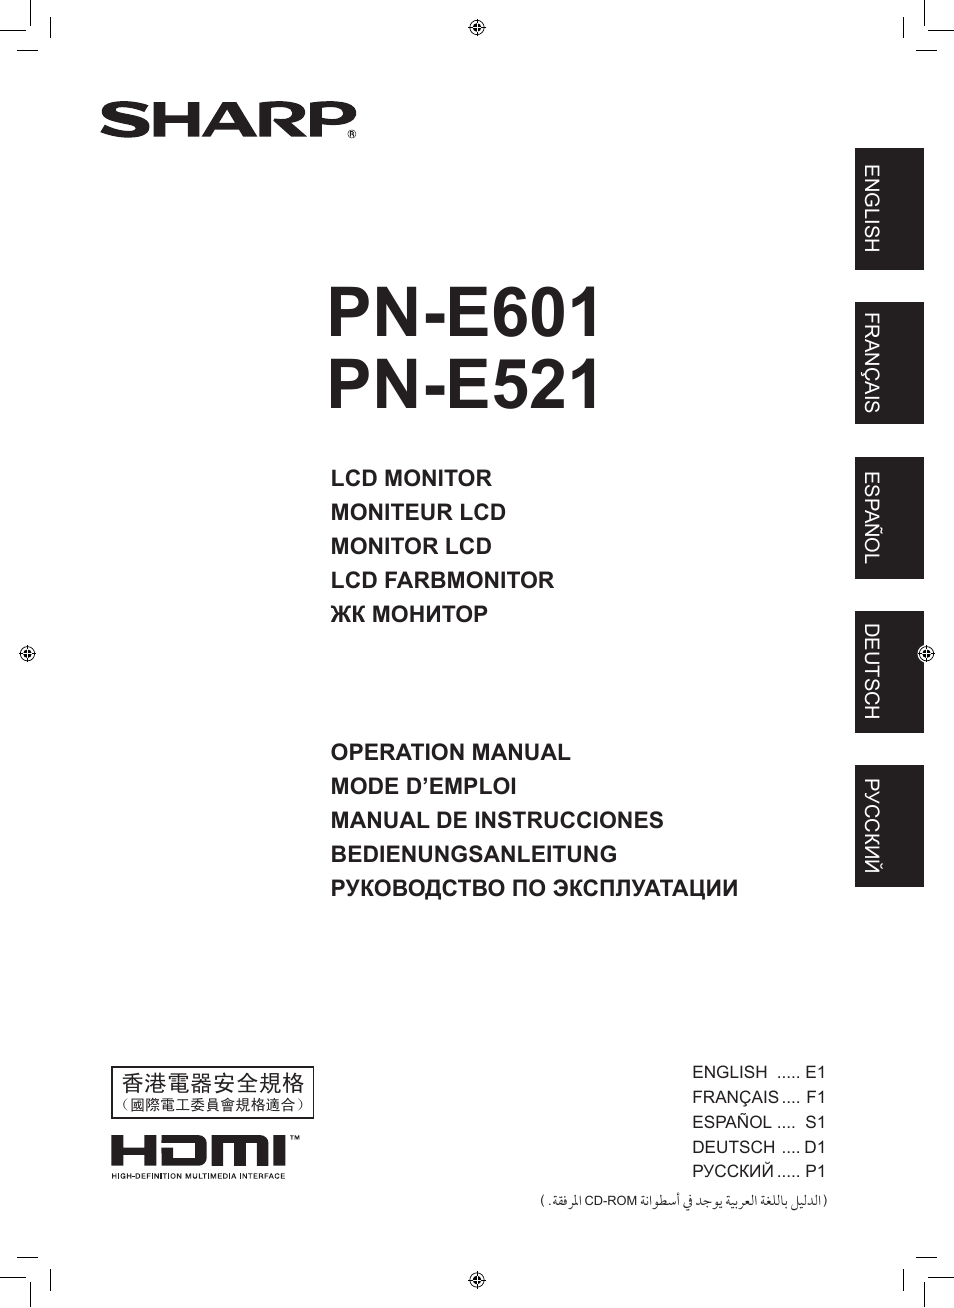 Sharp PN-E601 User Manual | 64 pages